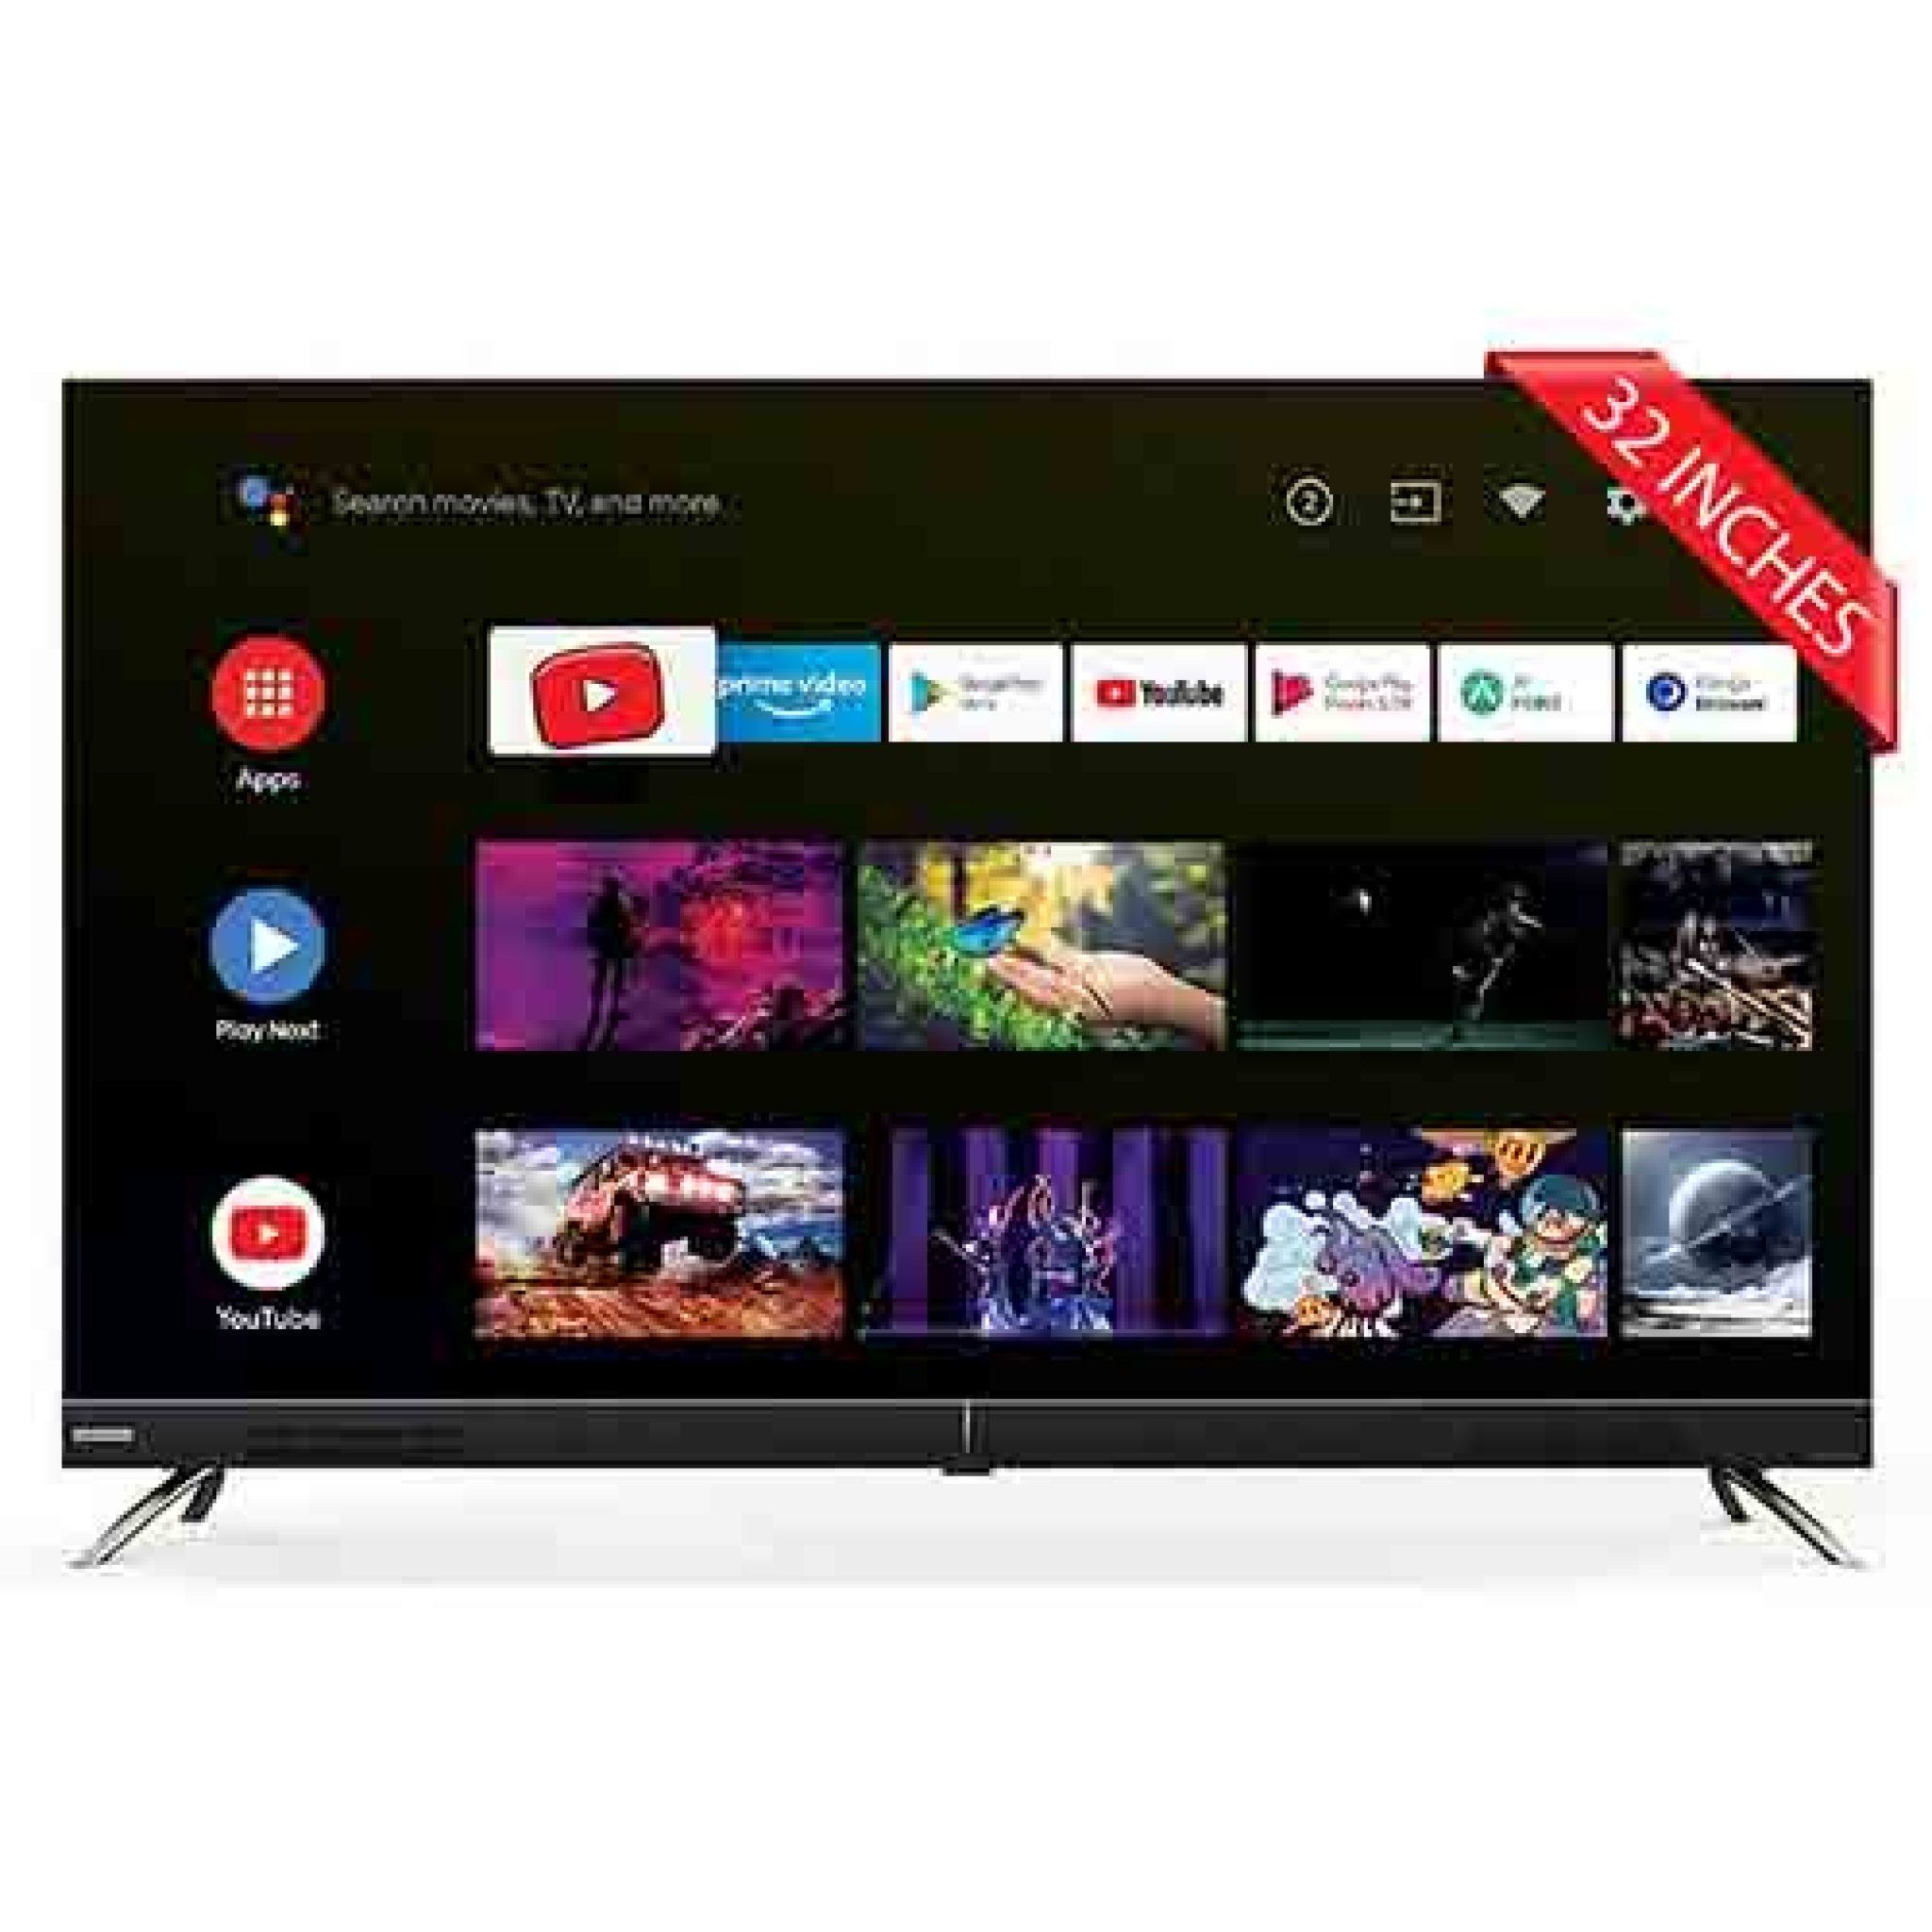 Samsung J5200 Series 5 49 Inch Smart Fhd Flat Tv Price In Pakistan 2020 Compare Online 